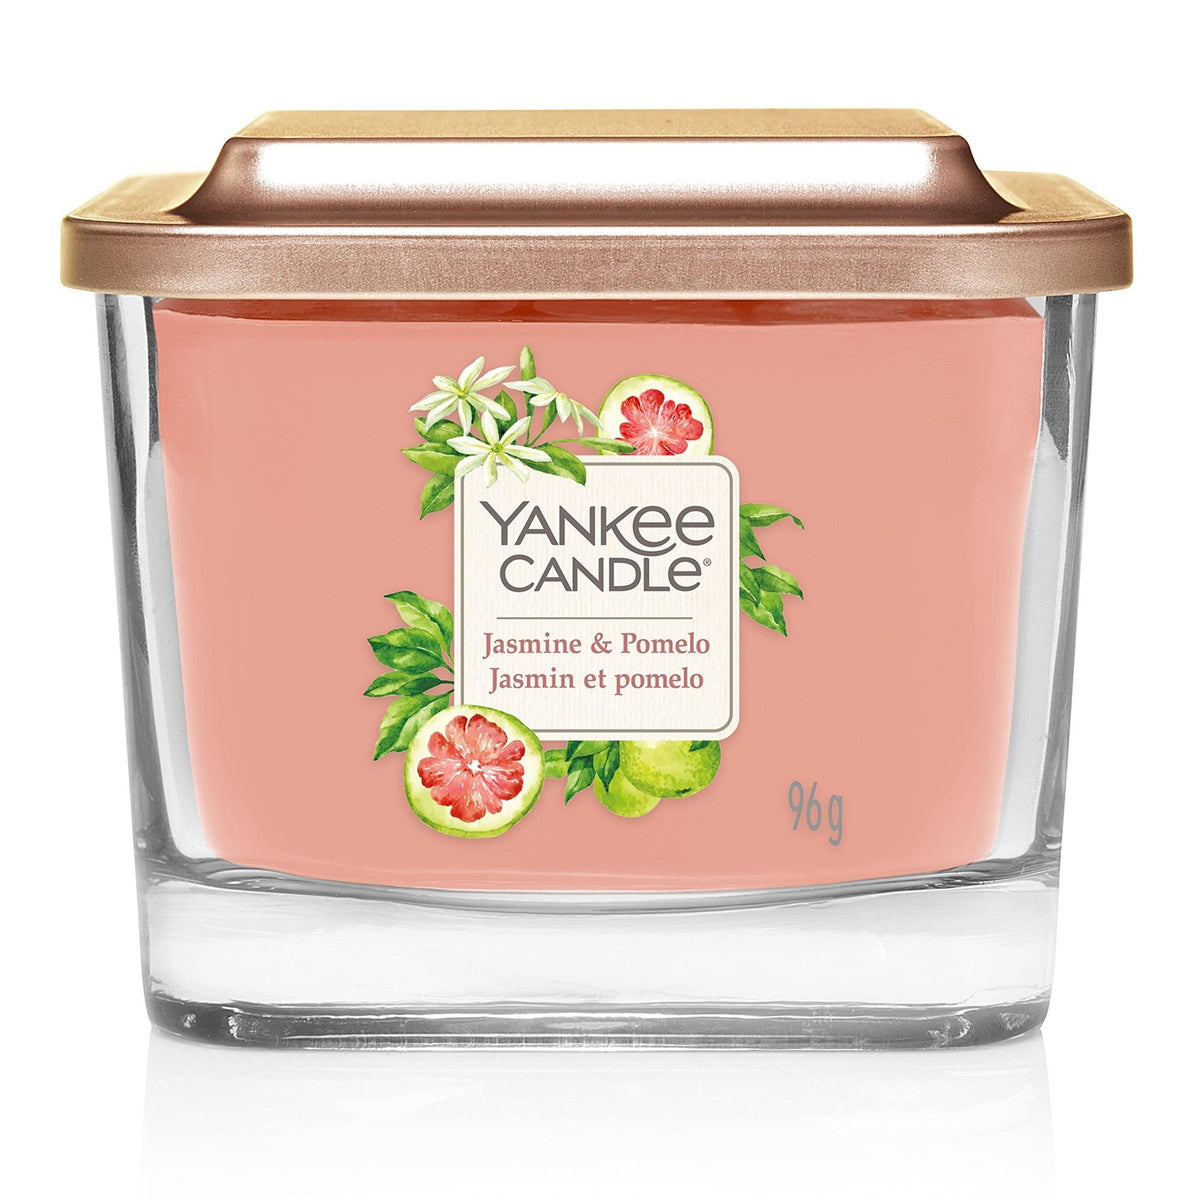 Yankee Candle Elevation Small Square Vessel Jasmine & Pomelo 96 G - AllurebeautypkYankee Candle Elevation Small Square Vessel Jasmine & Pomelo 96 G